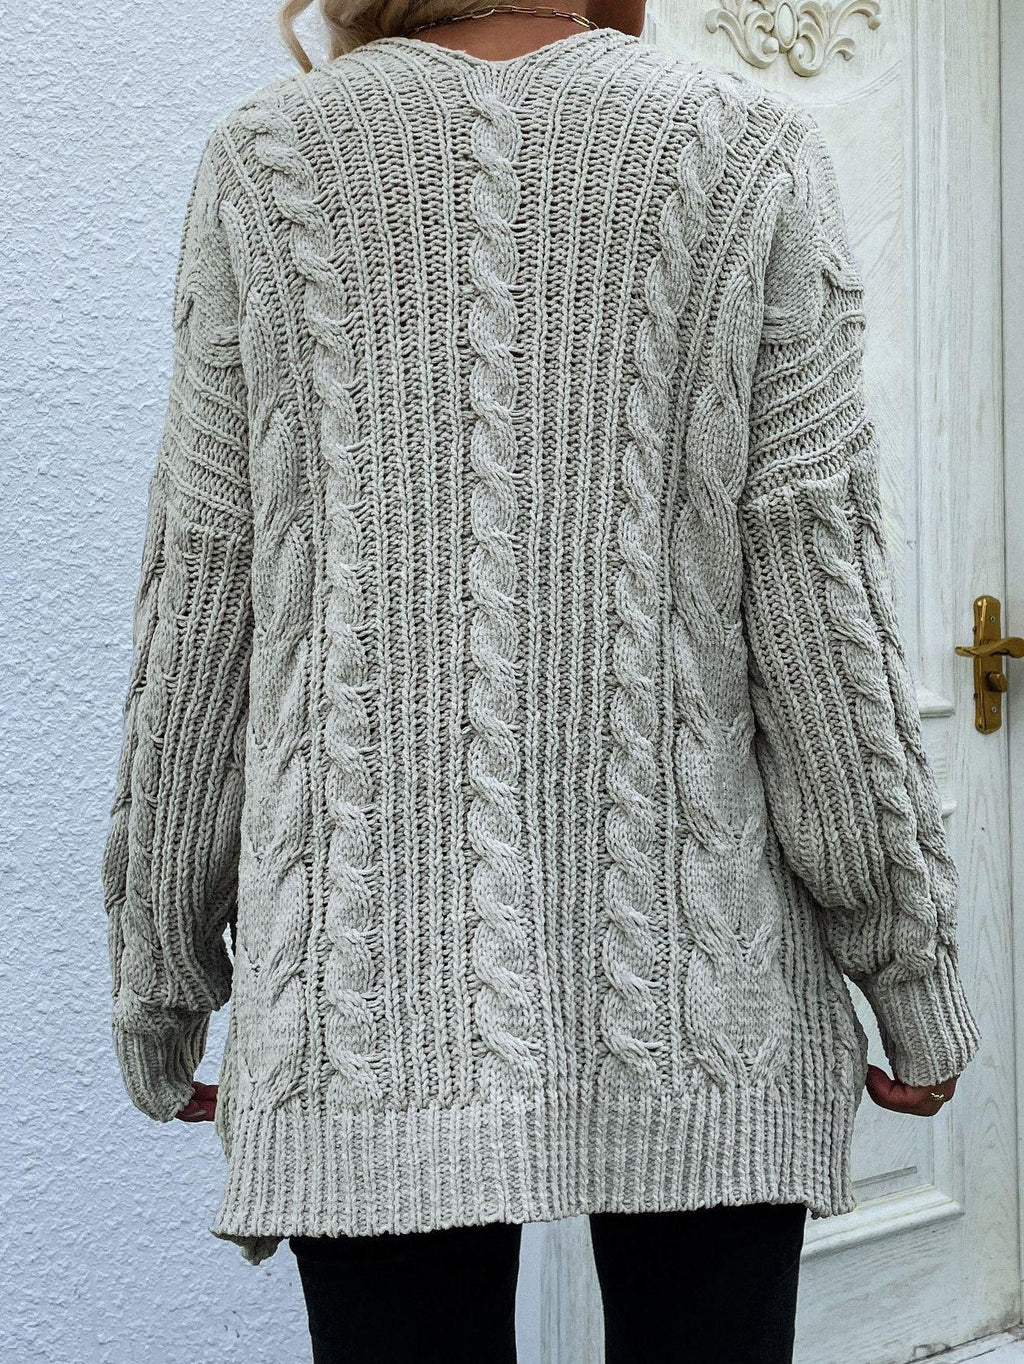 Hazel Blues® | Cable-Knit Open Front Cardigan with Front Pockets - Hazel Blues®